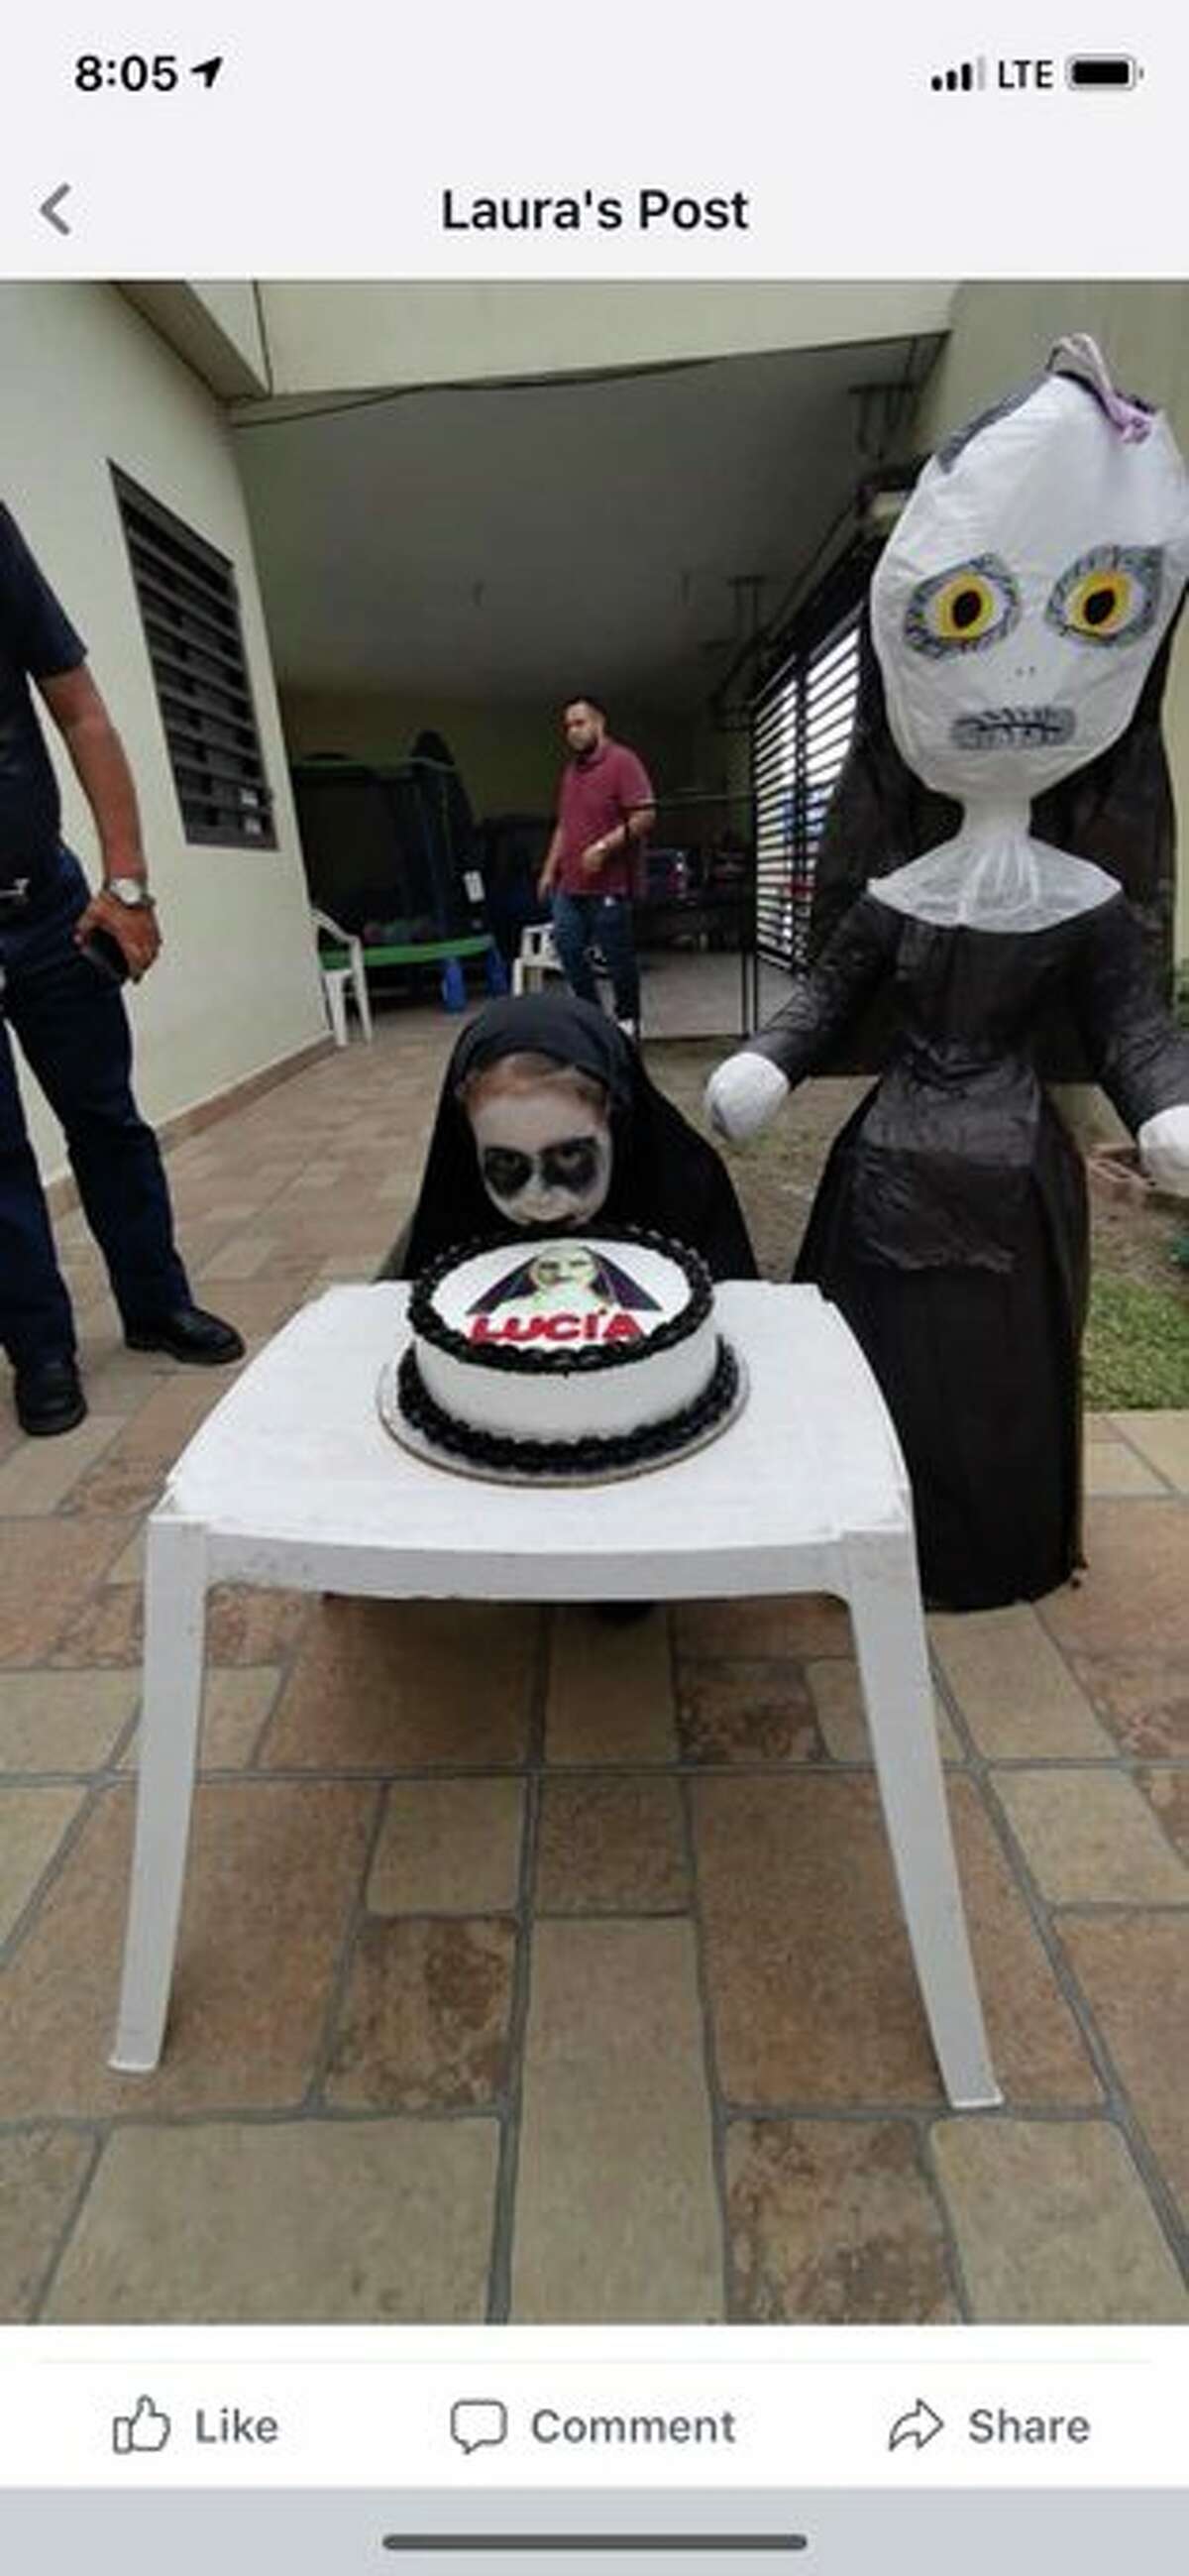 Little Lucia celebrated her 3rd birthday in Monterrey, Mexico dressed as a tiny version of the demonic nun from "The Nun" on Monday, her cousin Andrea Villarreal, a San Antonio resident, told mySA.com. Villarreal tweeted photos of the little girl in what has become an insanely popular post that even Jordan Peele noticed.